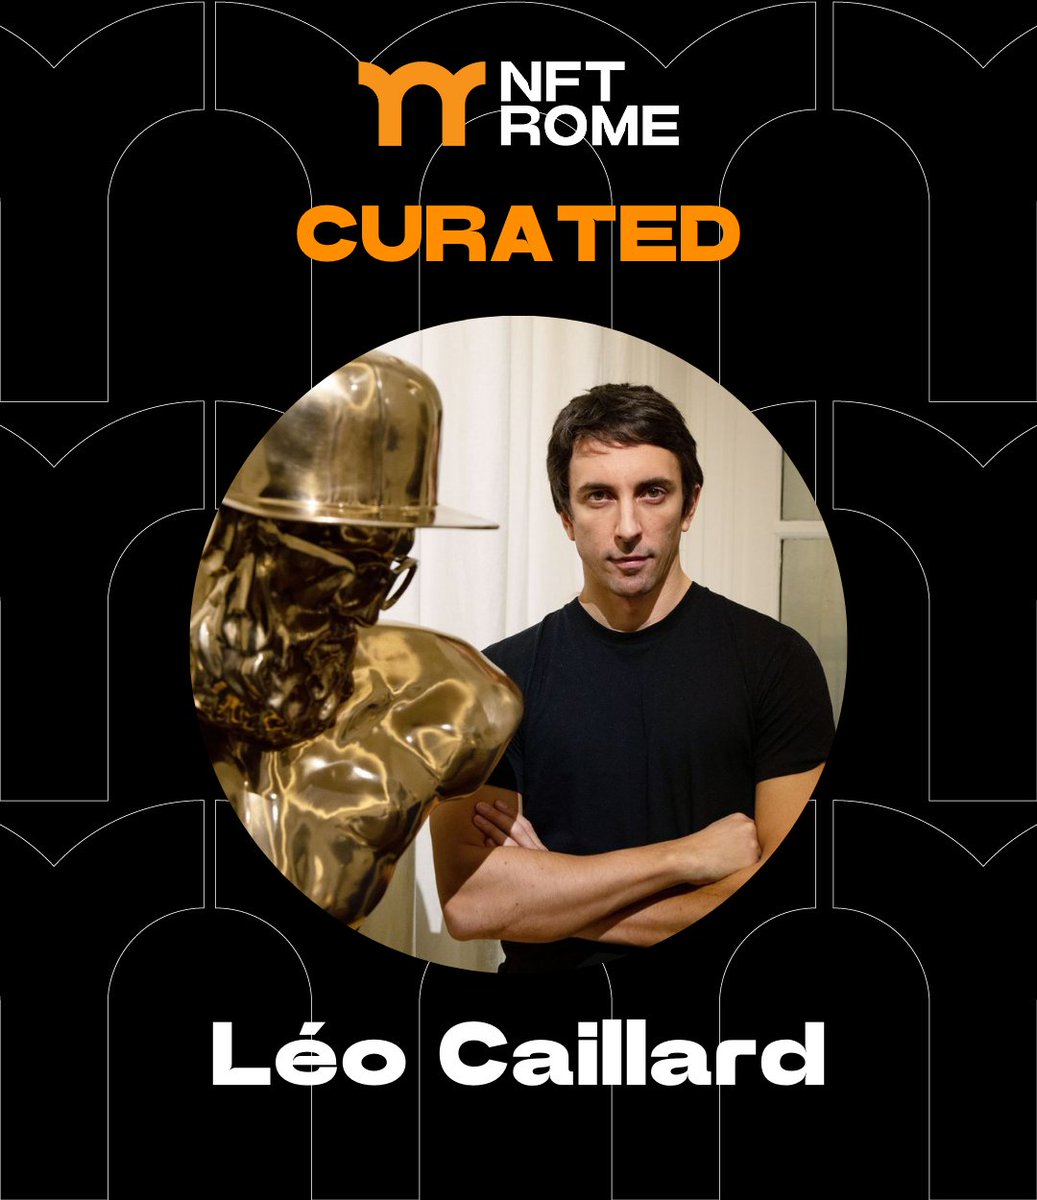 We are excited to announce that @leocaillard will be part of our 'Curated Initiative' at NFT Rome.😍 Leo Caillard is a contemporary French artist known for his innovative and thought-provoking works that often blend classical and modern elements.